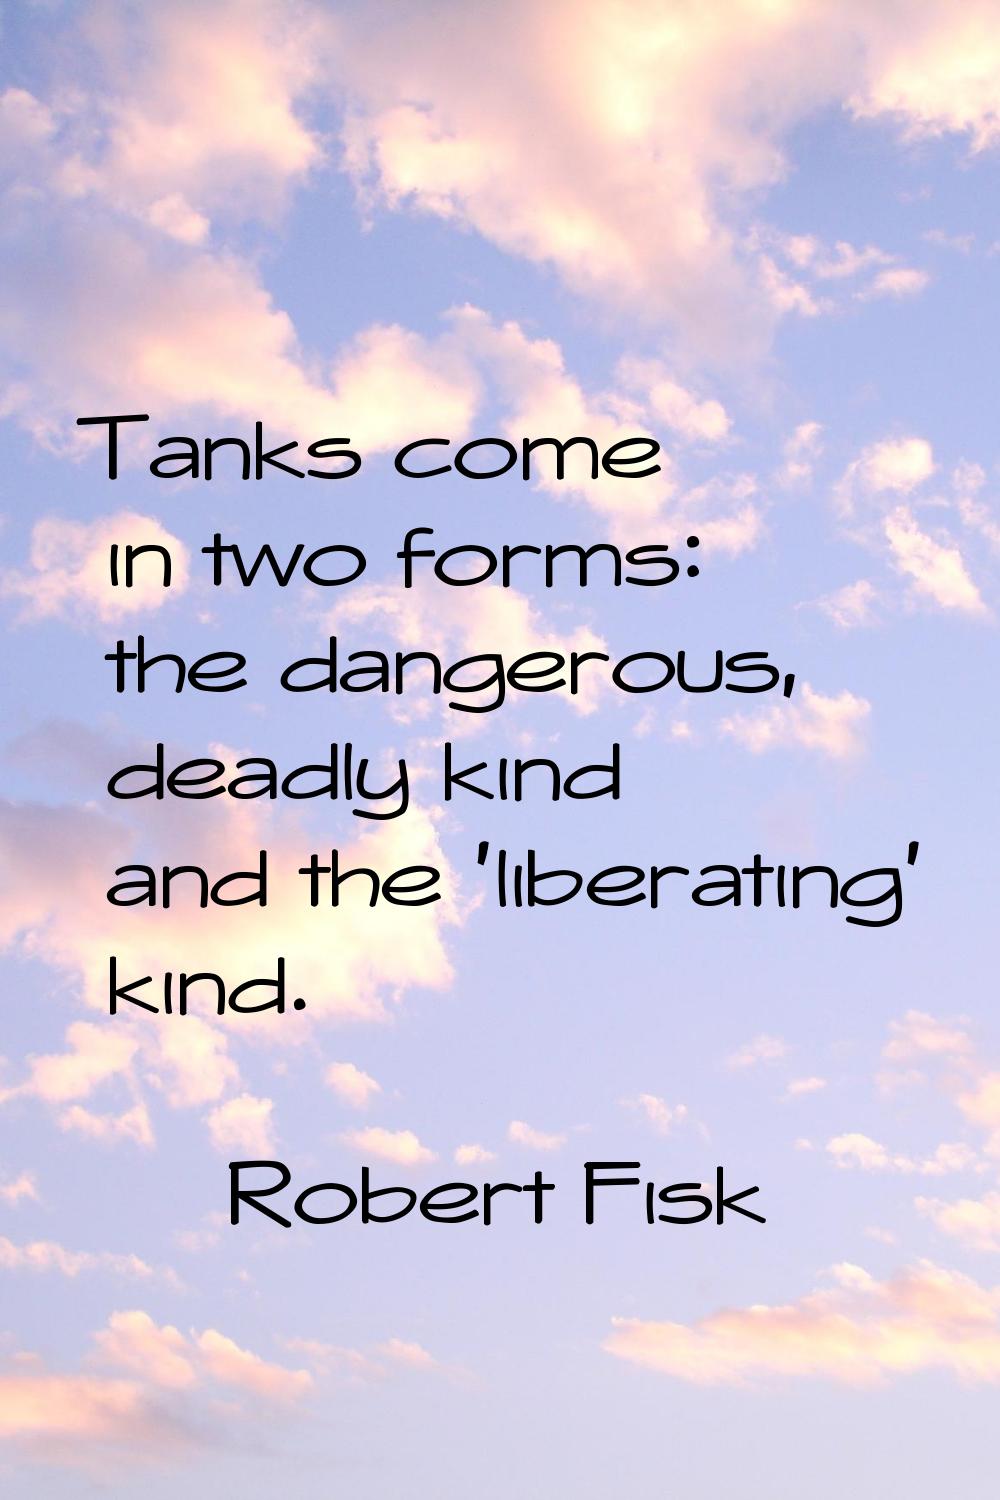 Tanks come in two forms: the dangerous, deadly kind and the 'liberating' kind.